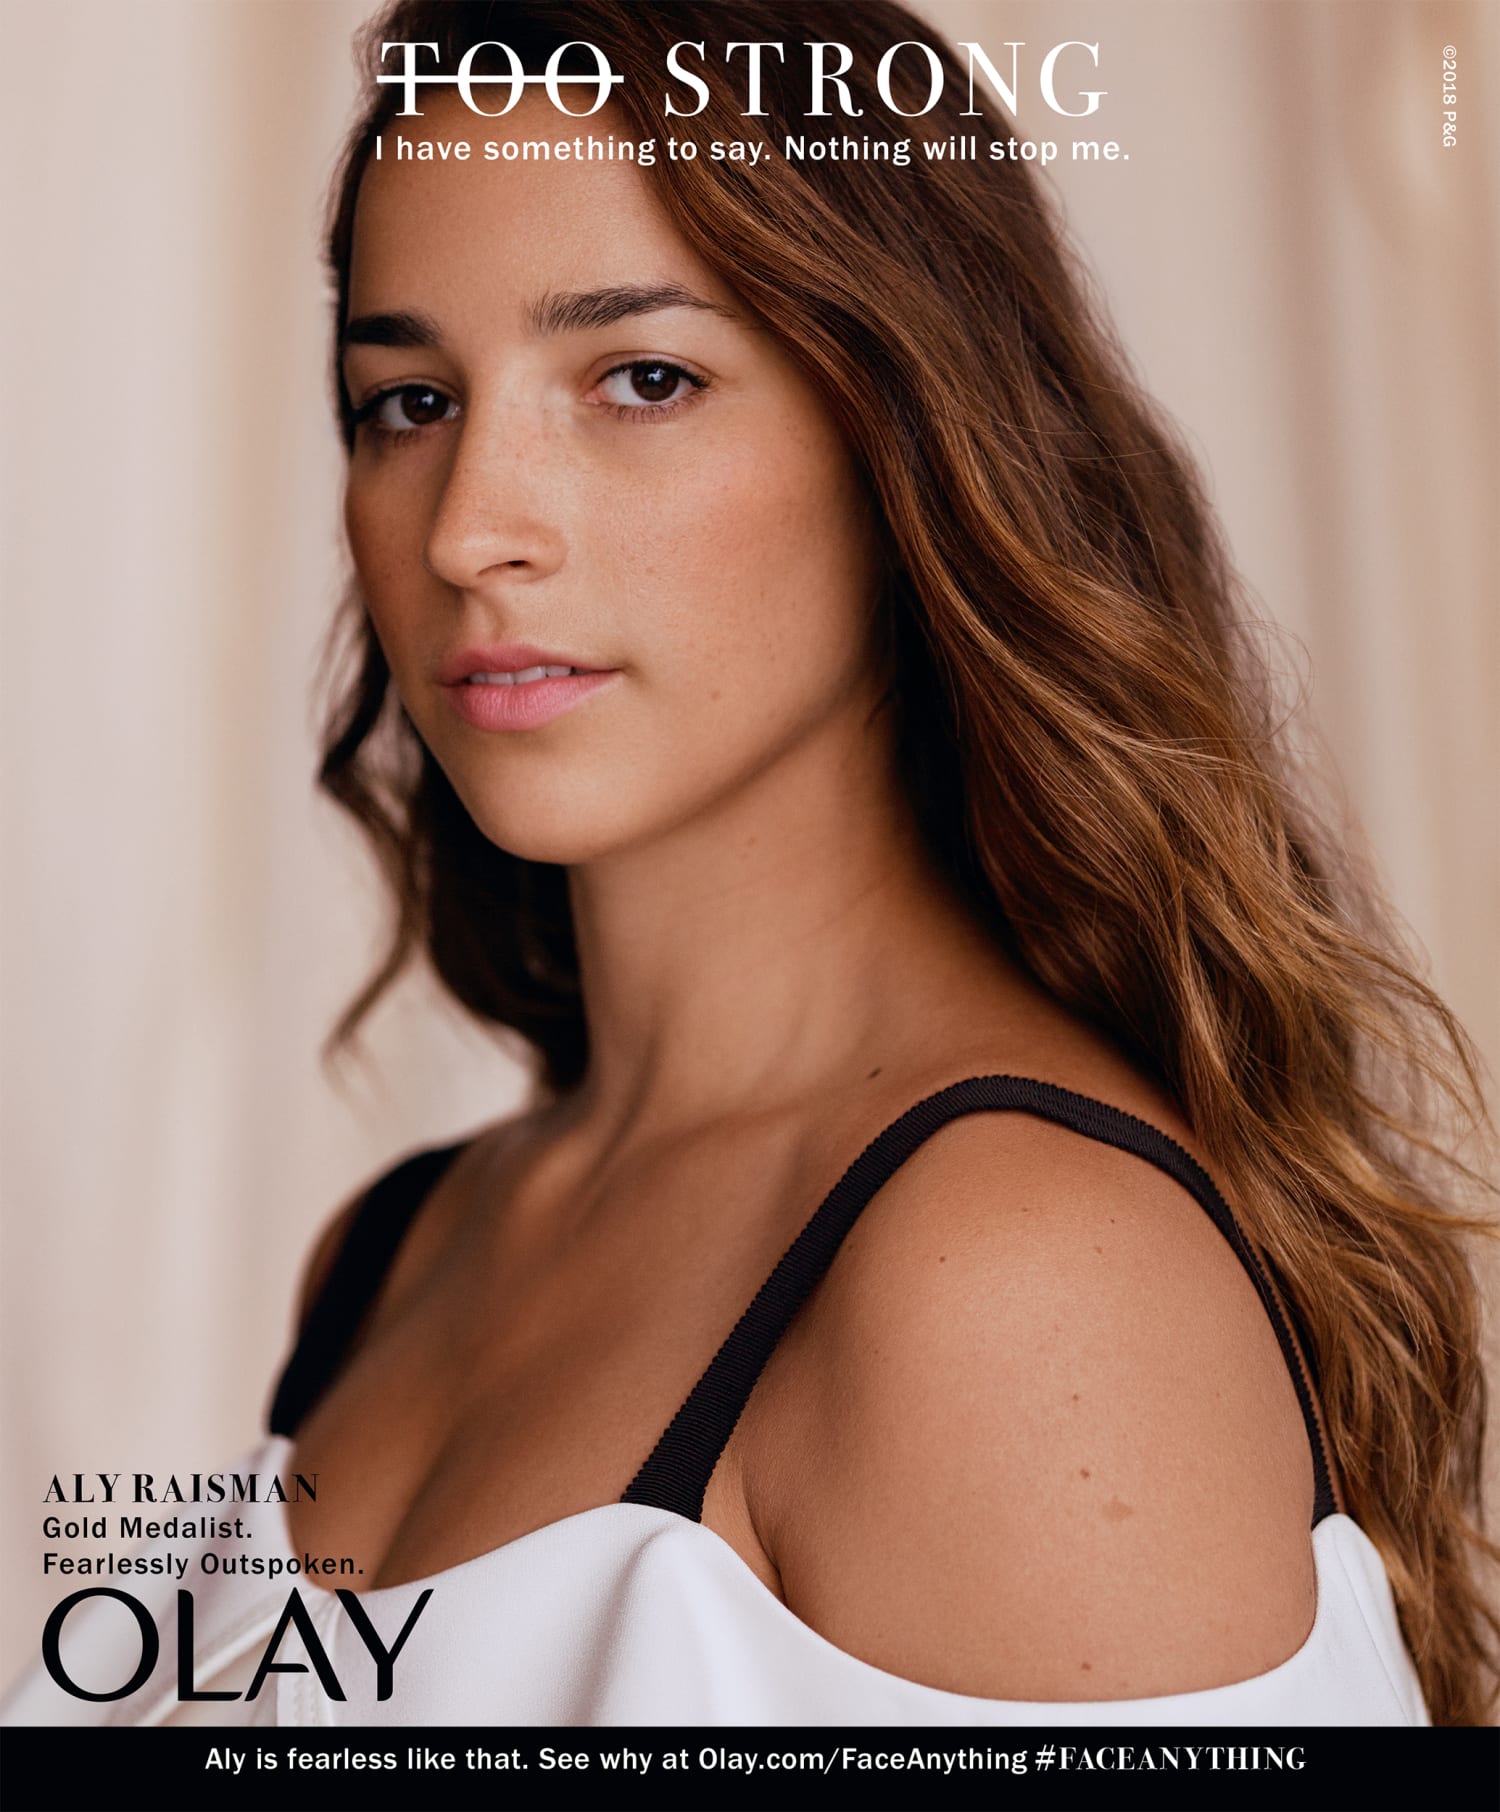 Aly Raisman stars in Olay #FaceAnything campaign